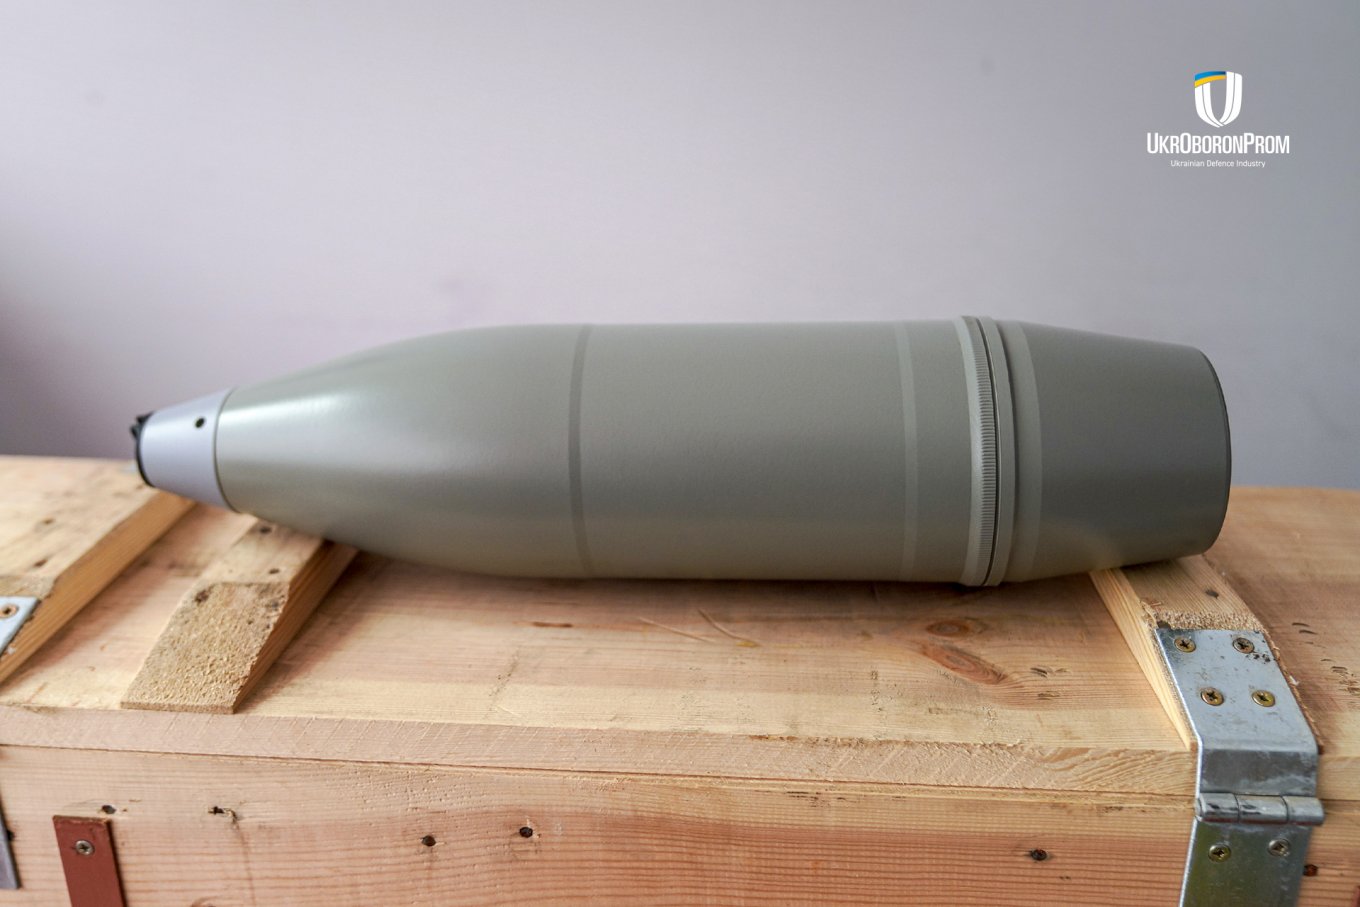 The 122-mm projectile manufactured by the Ukroboronprom State Concern jointly with NATO member Defense Express Ukroboronprom Shipped 122-mm Projectiles Jointly Produced With NATO Member